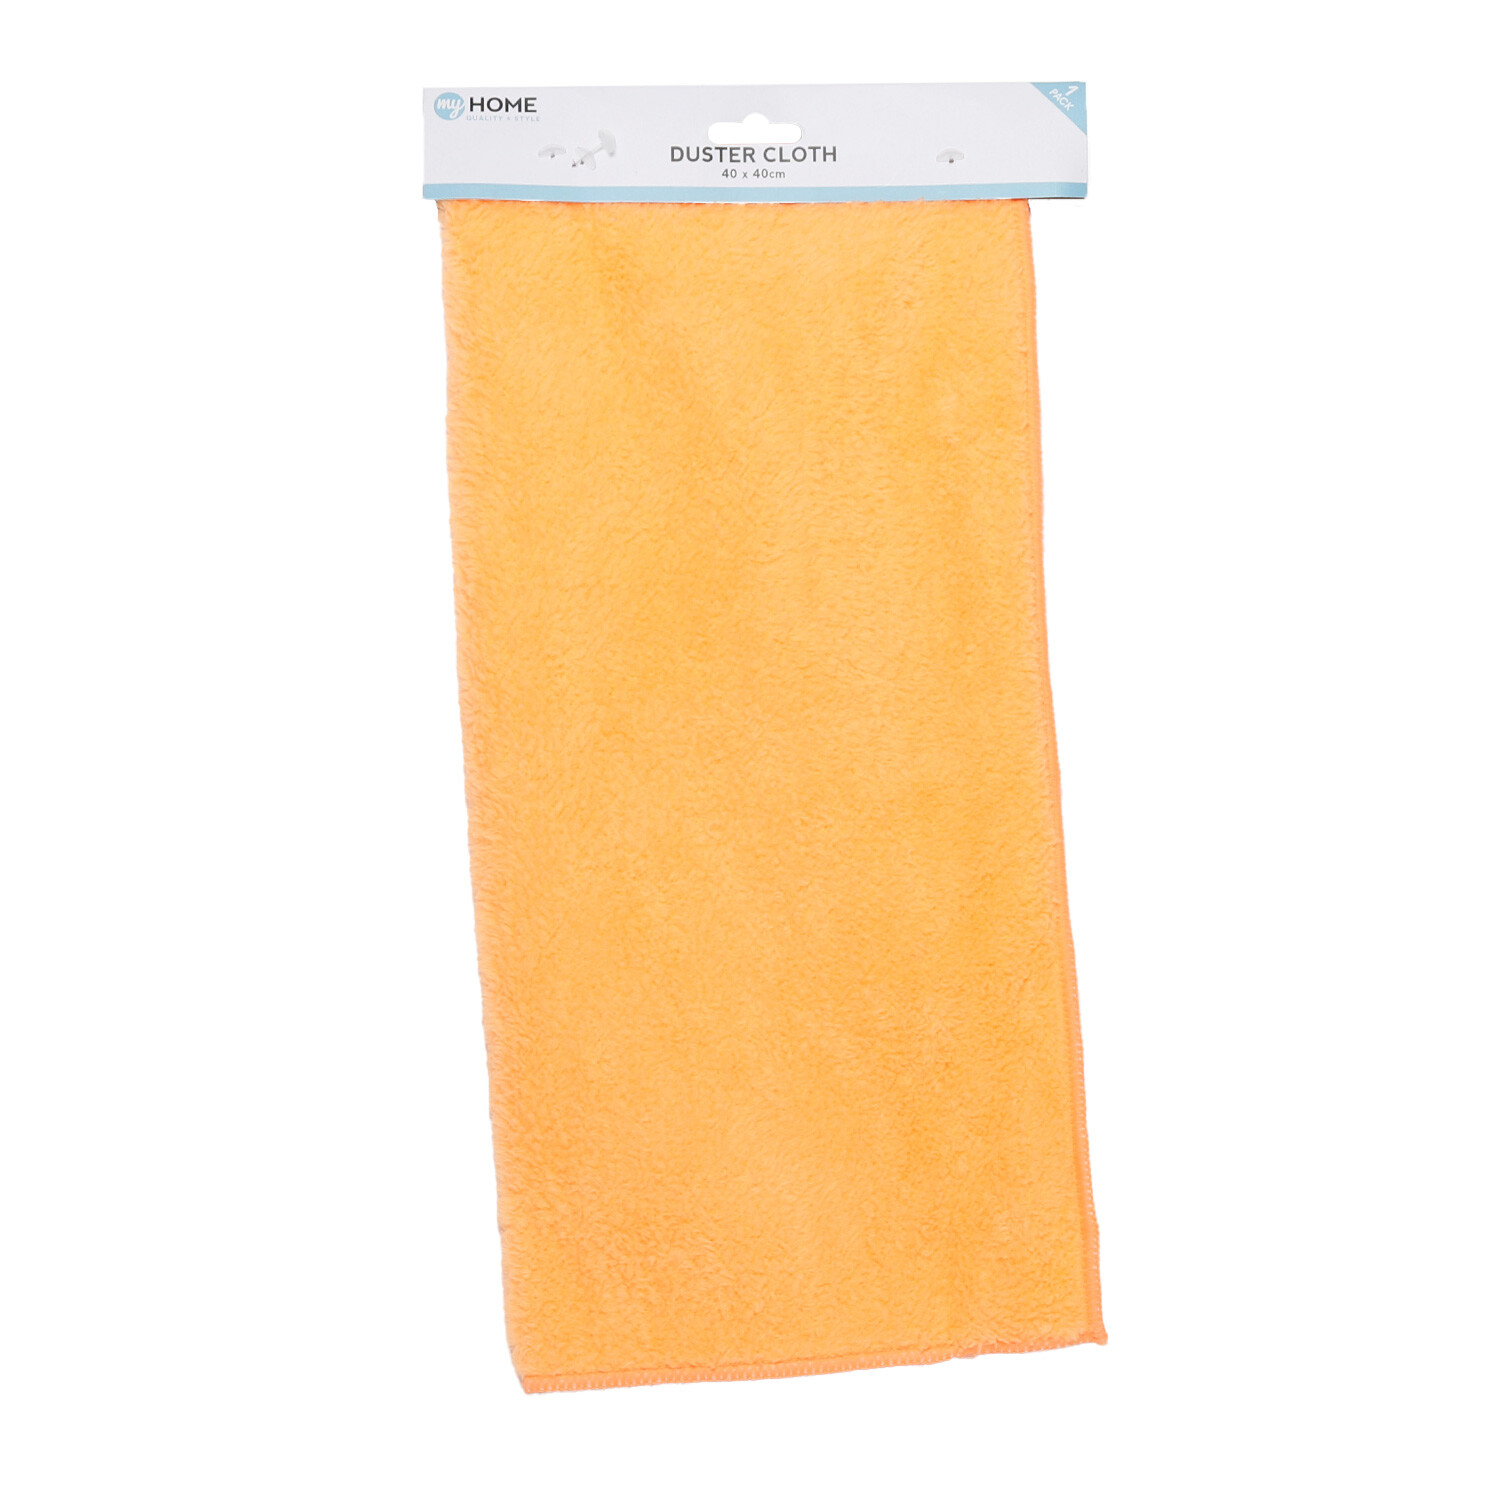 My Home Duster Cloth - Yellow Image